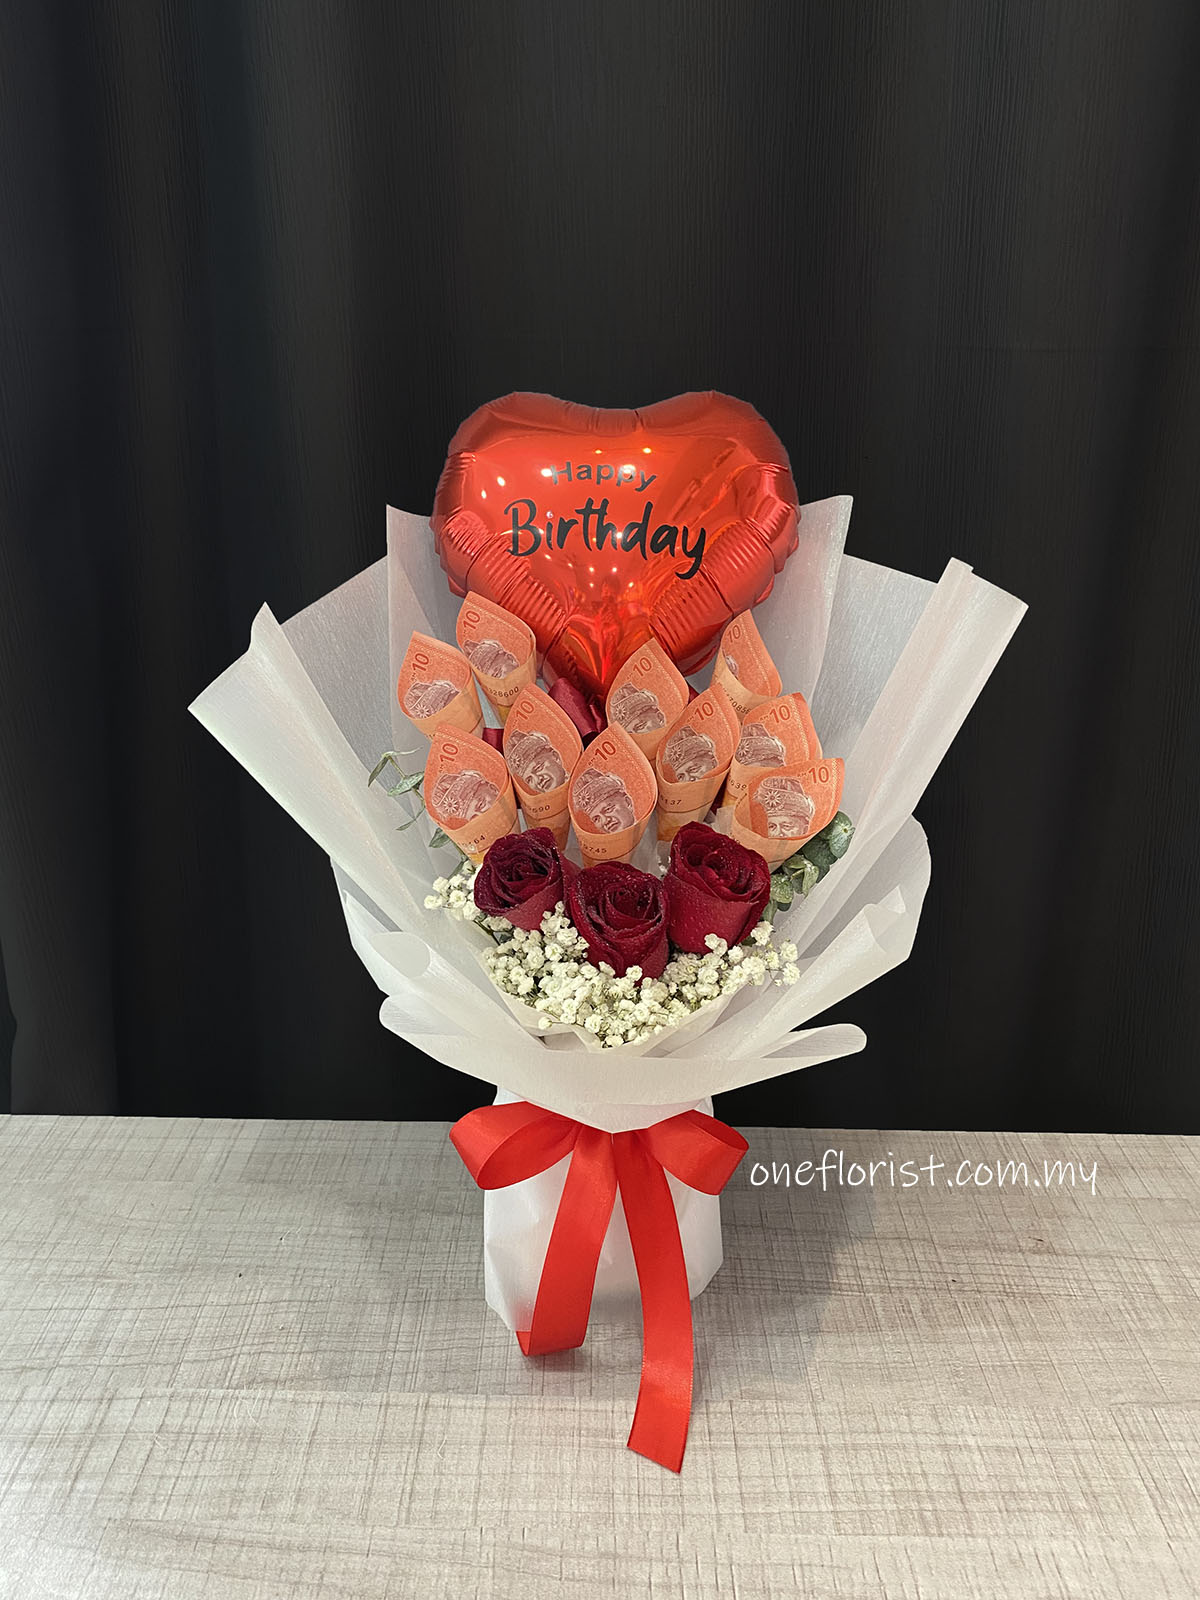 Money bouquet with 3 red fresh roses